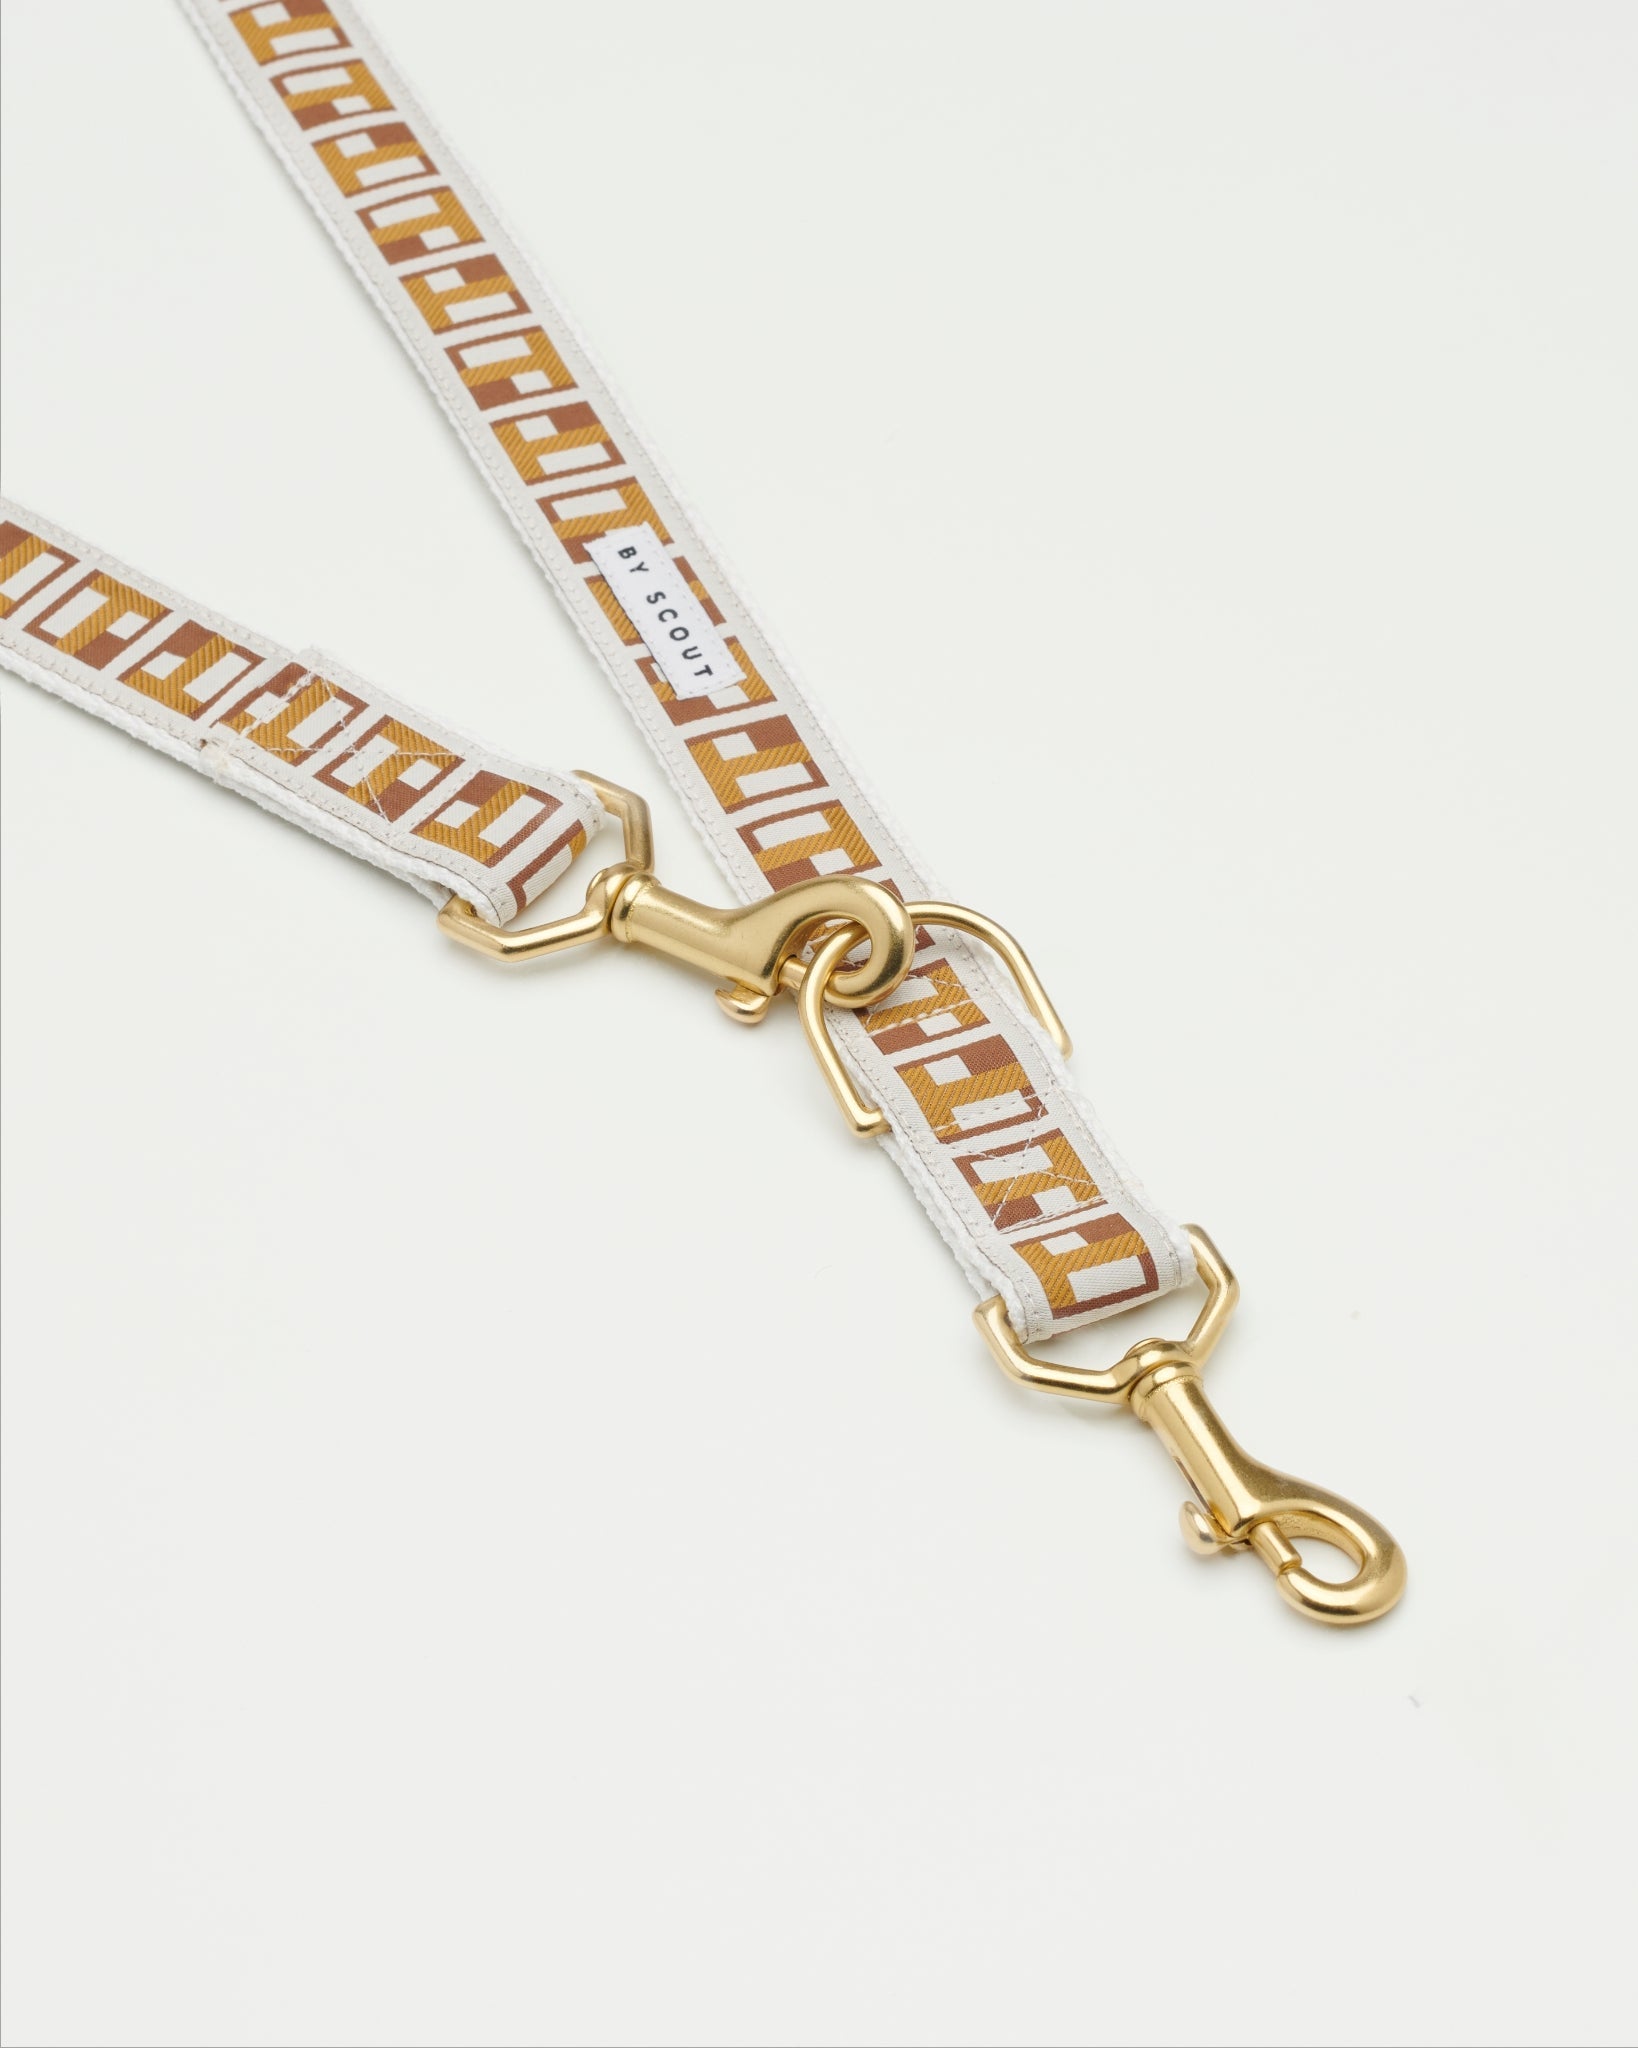 Trove Adjustable City Leash - Golden Browns - By Scout